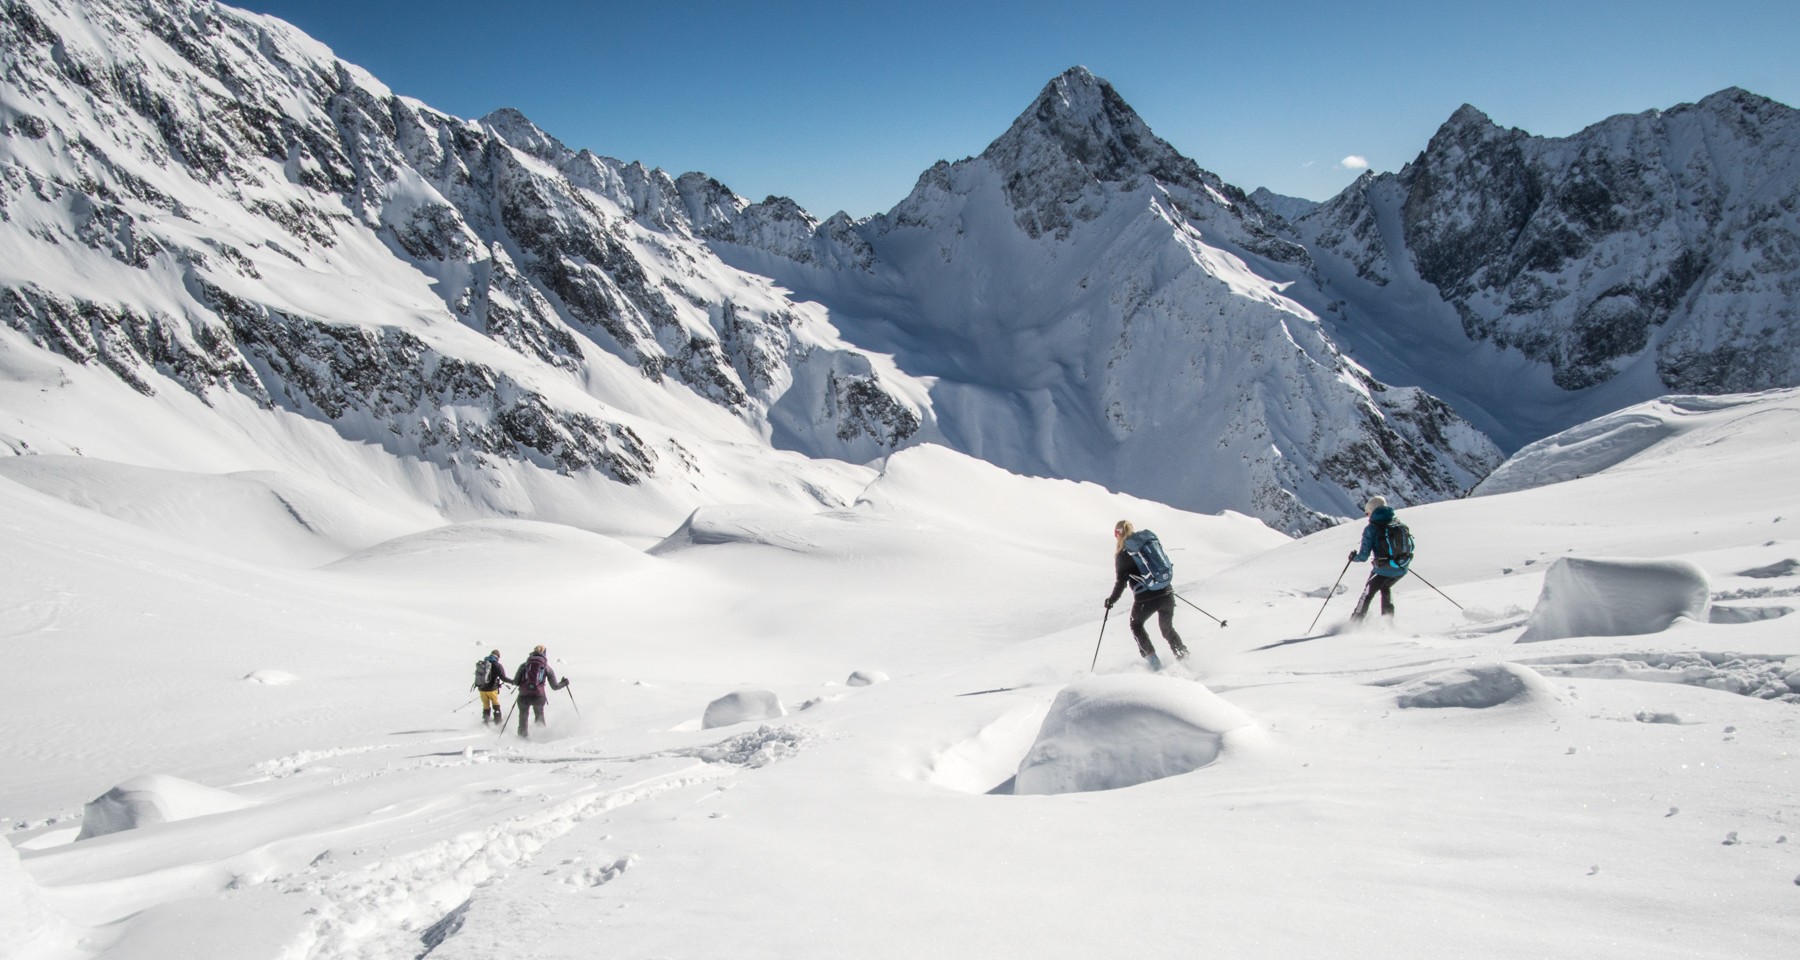 Ski Touring course for the advanced